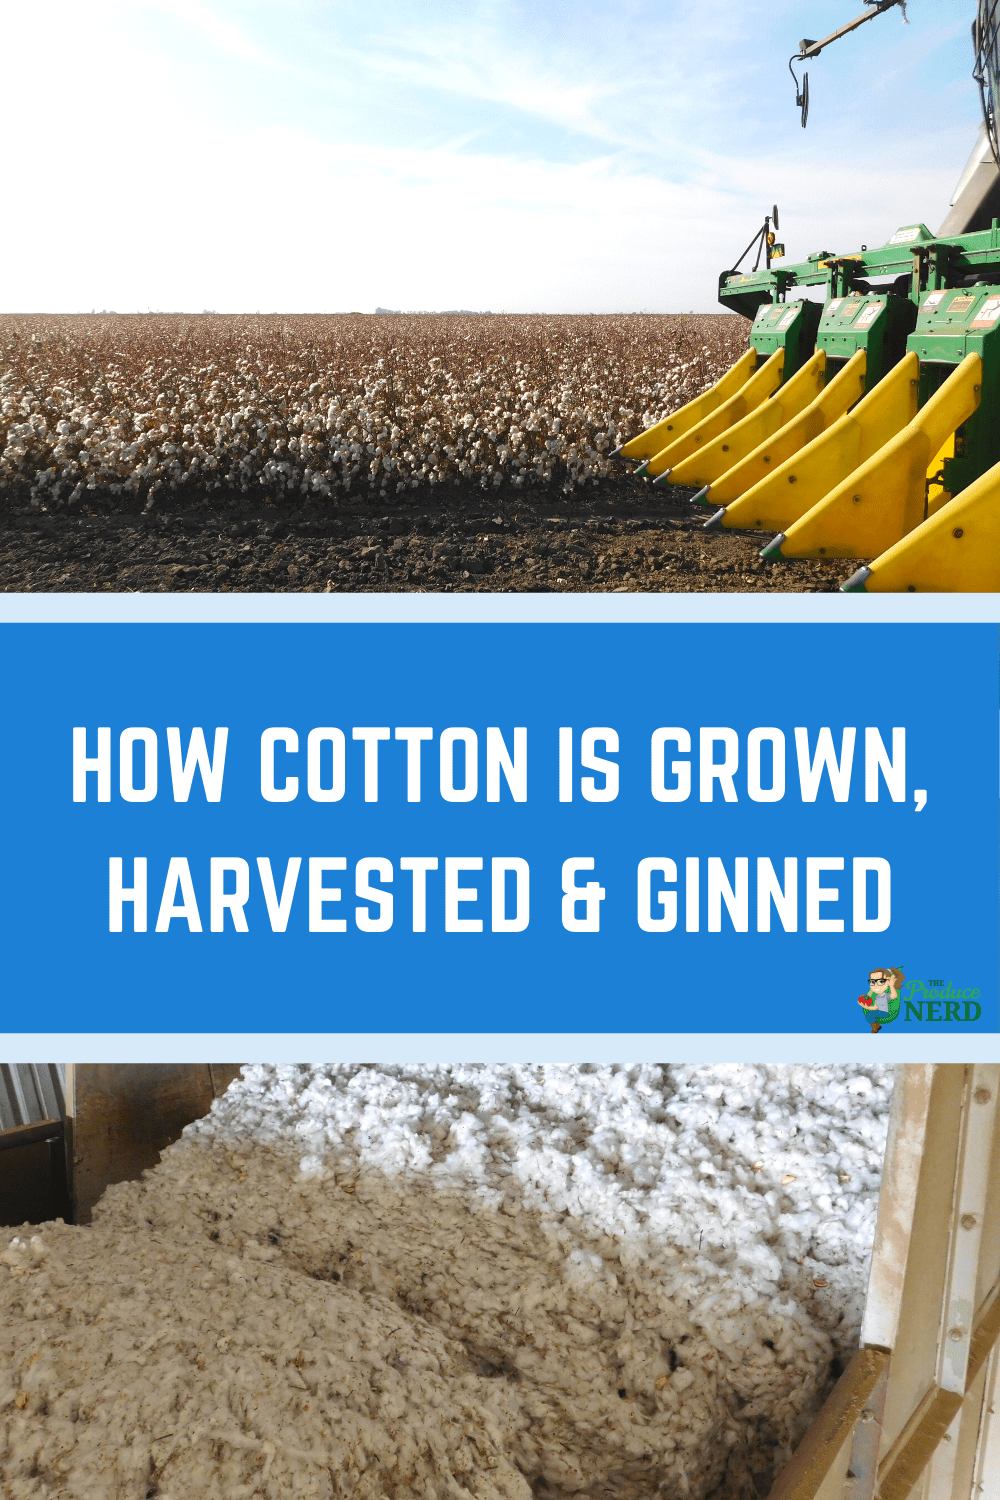 You are currently viewing How is Cotton Grown, Harvested & Ginned in California